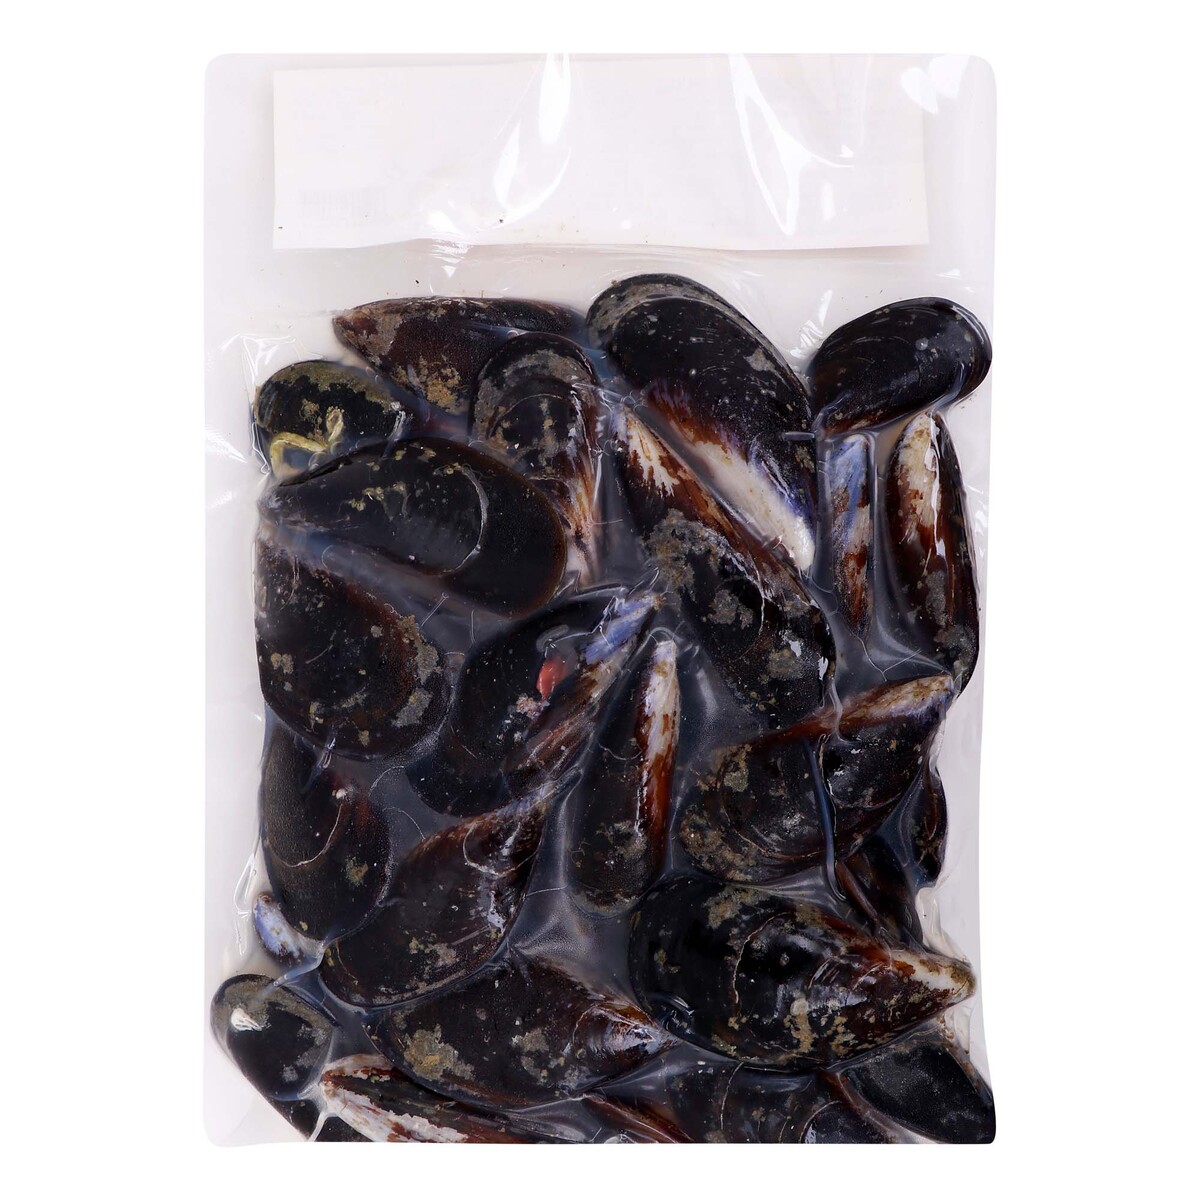 Cies Whole Cooked Mussel 1 kg